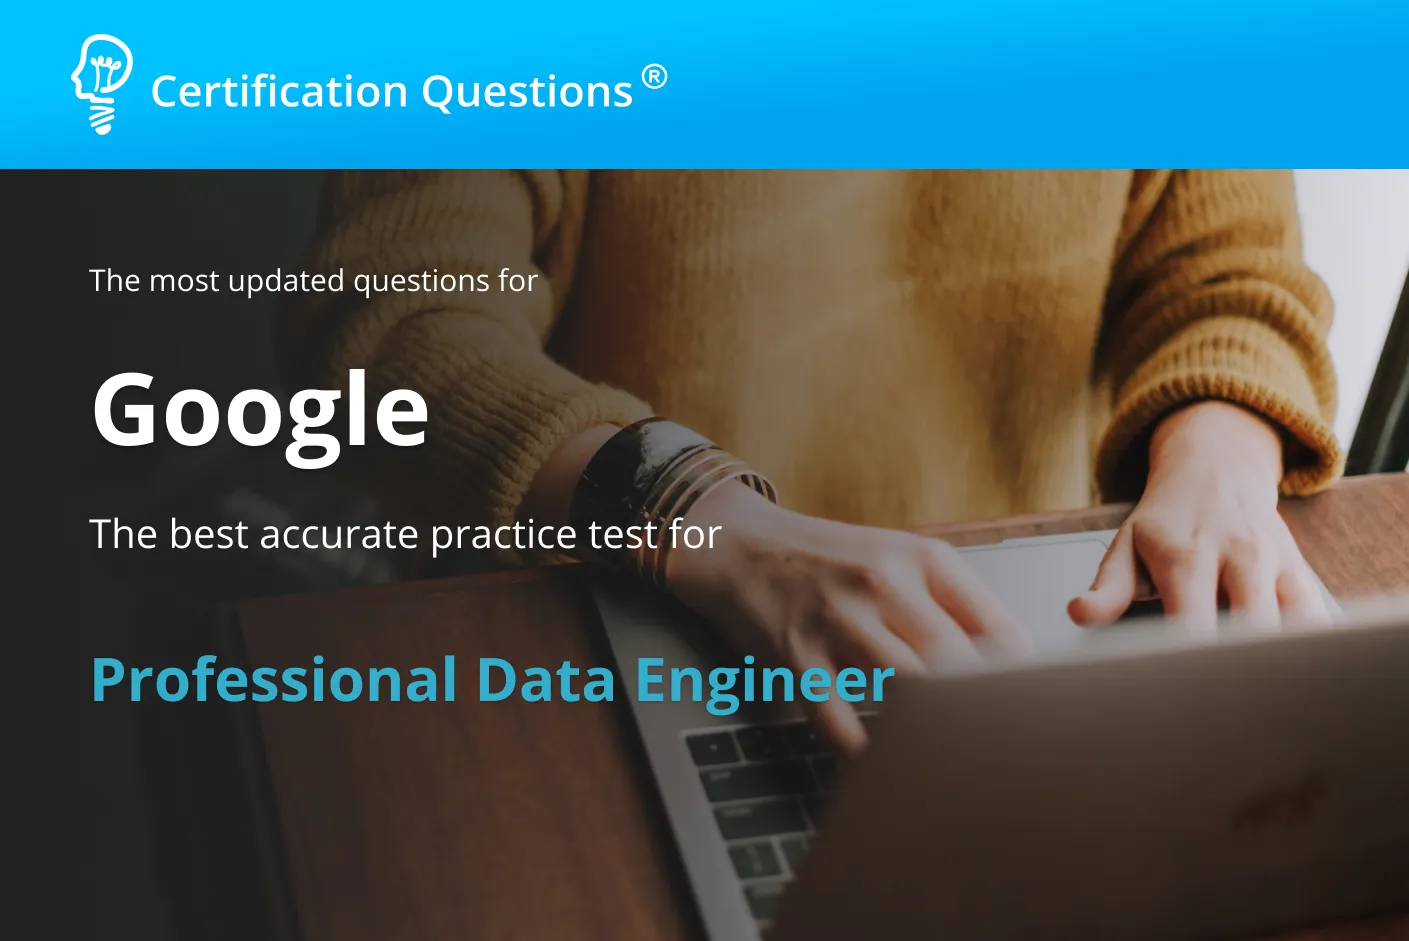 This image is related to the google professional data engineer practice exam.